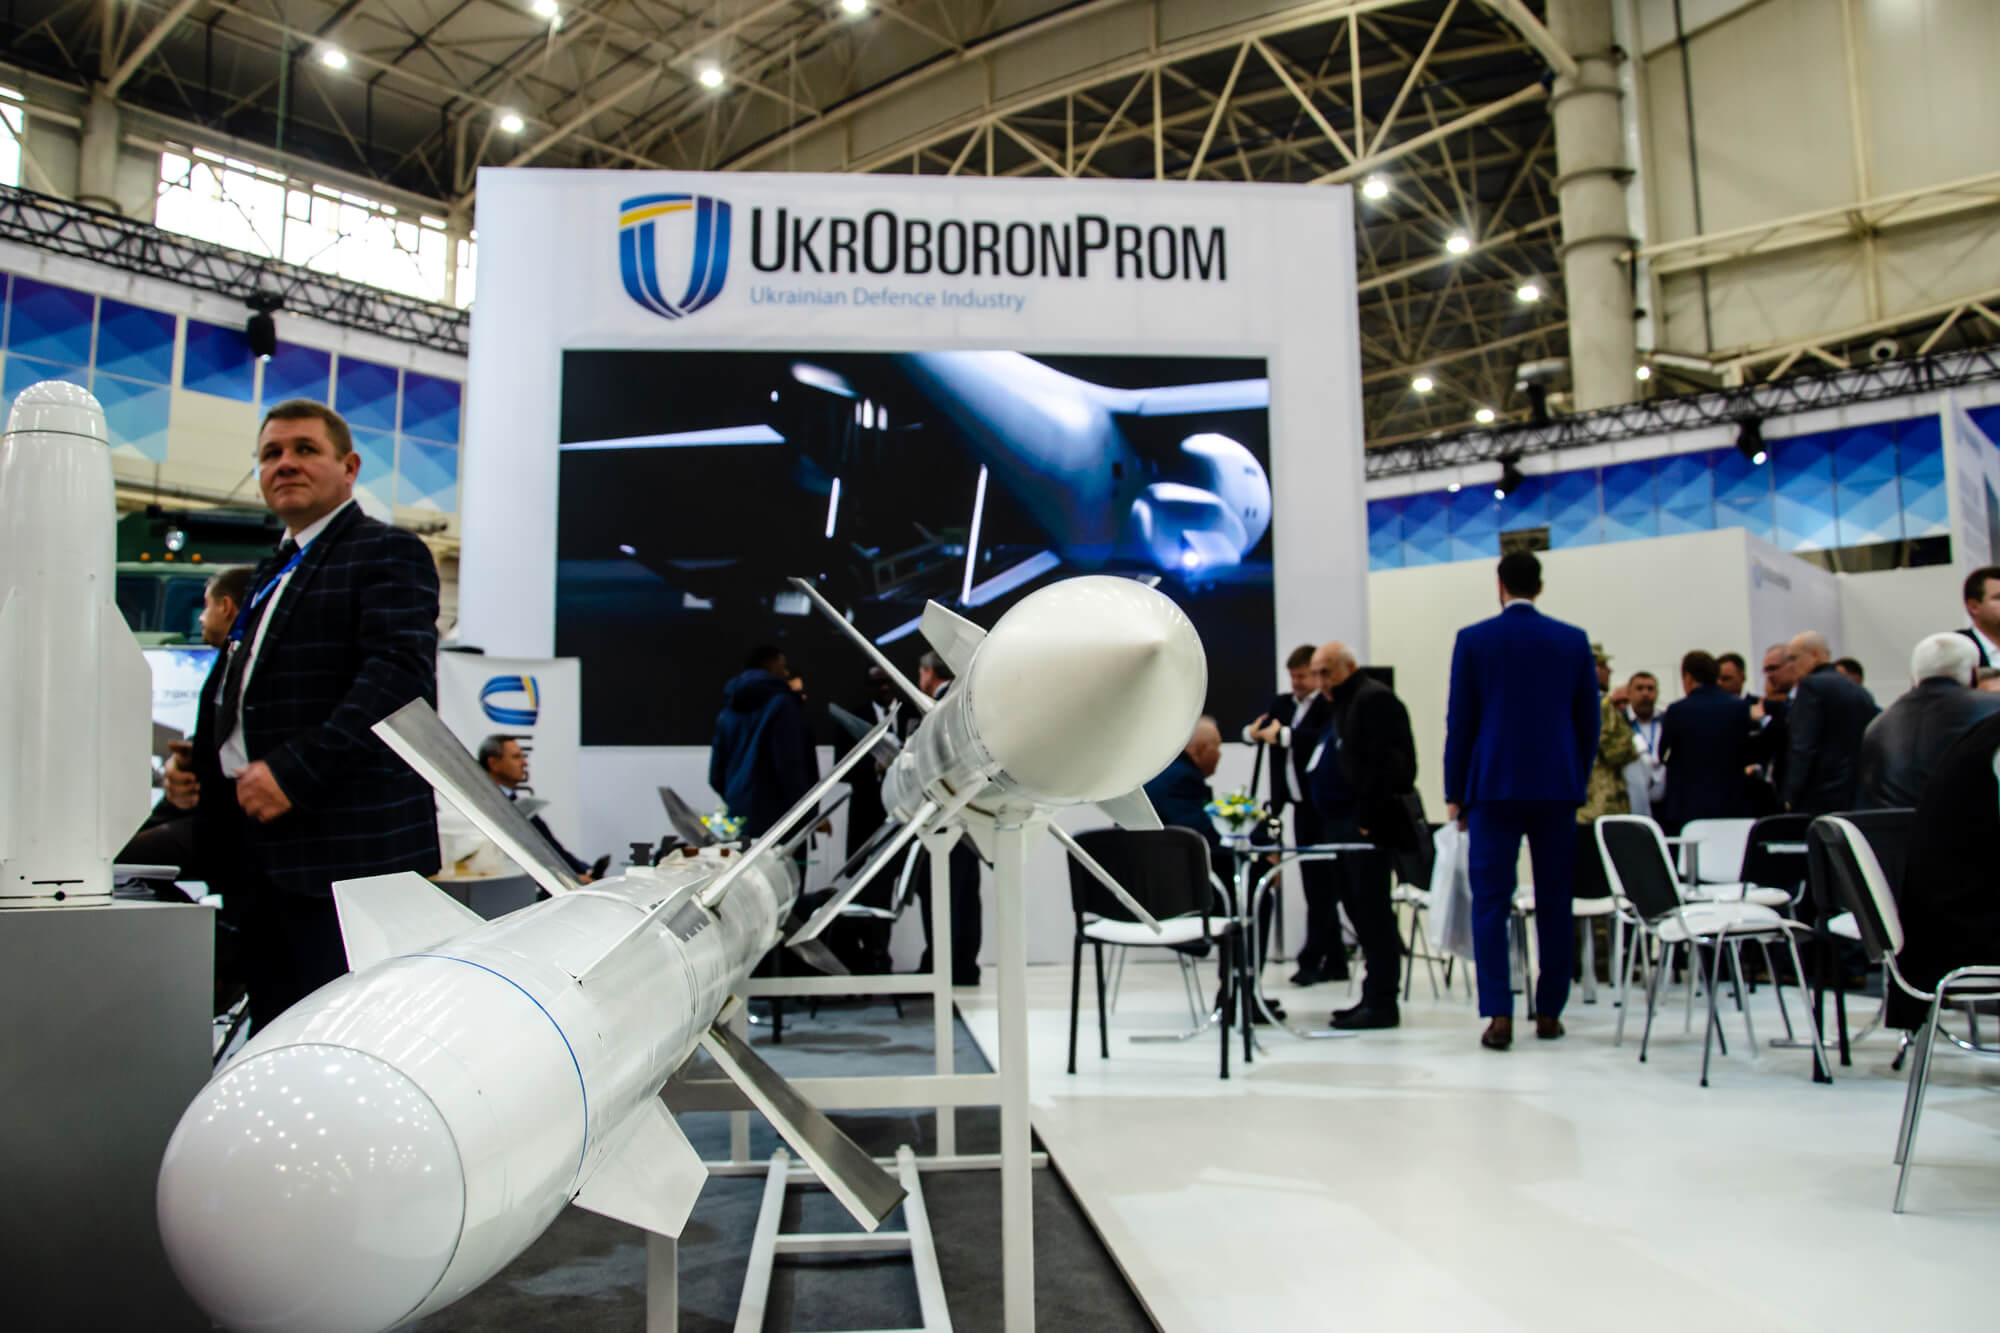 Will Ukraine’s Defence Industry Belong to a Ministry of Plenty or Strategic Industry?